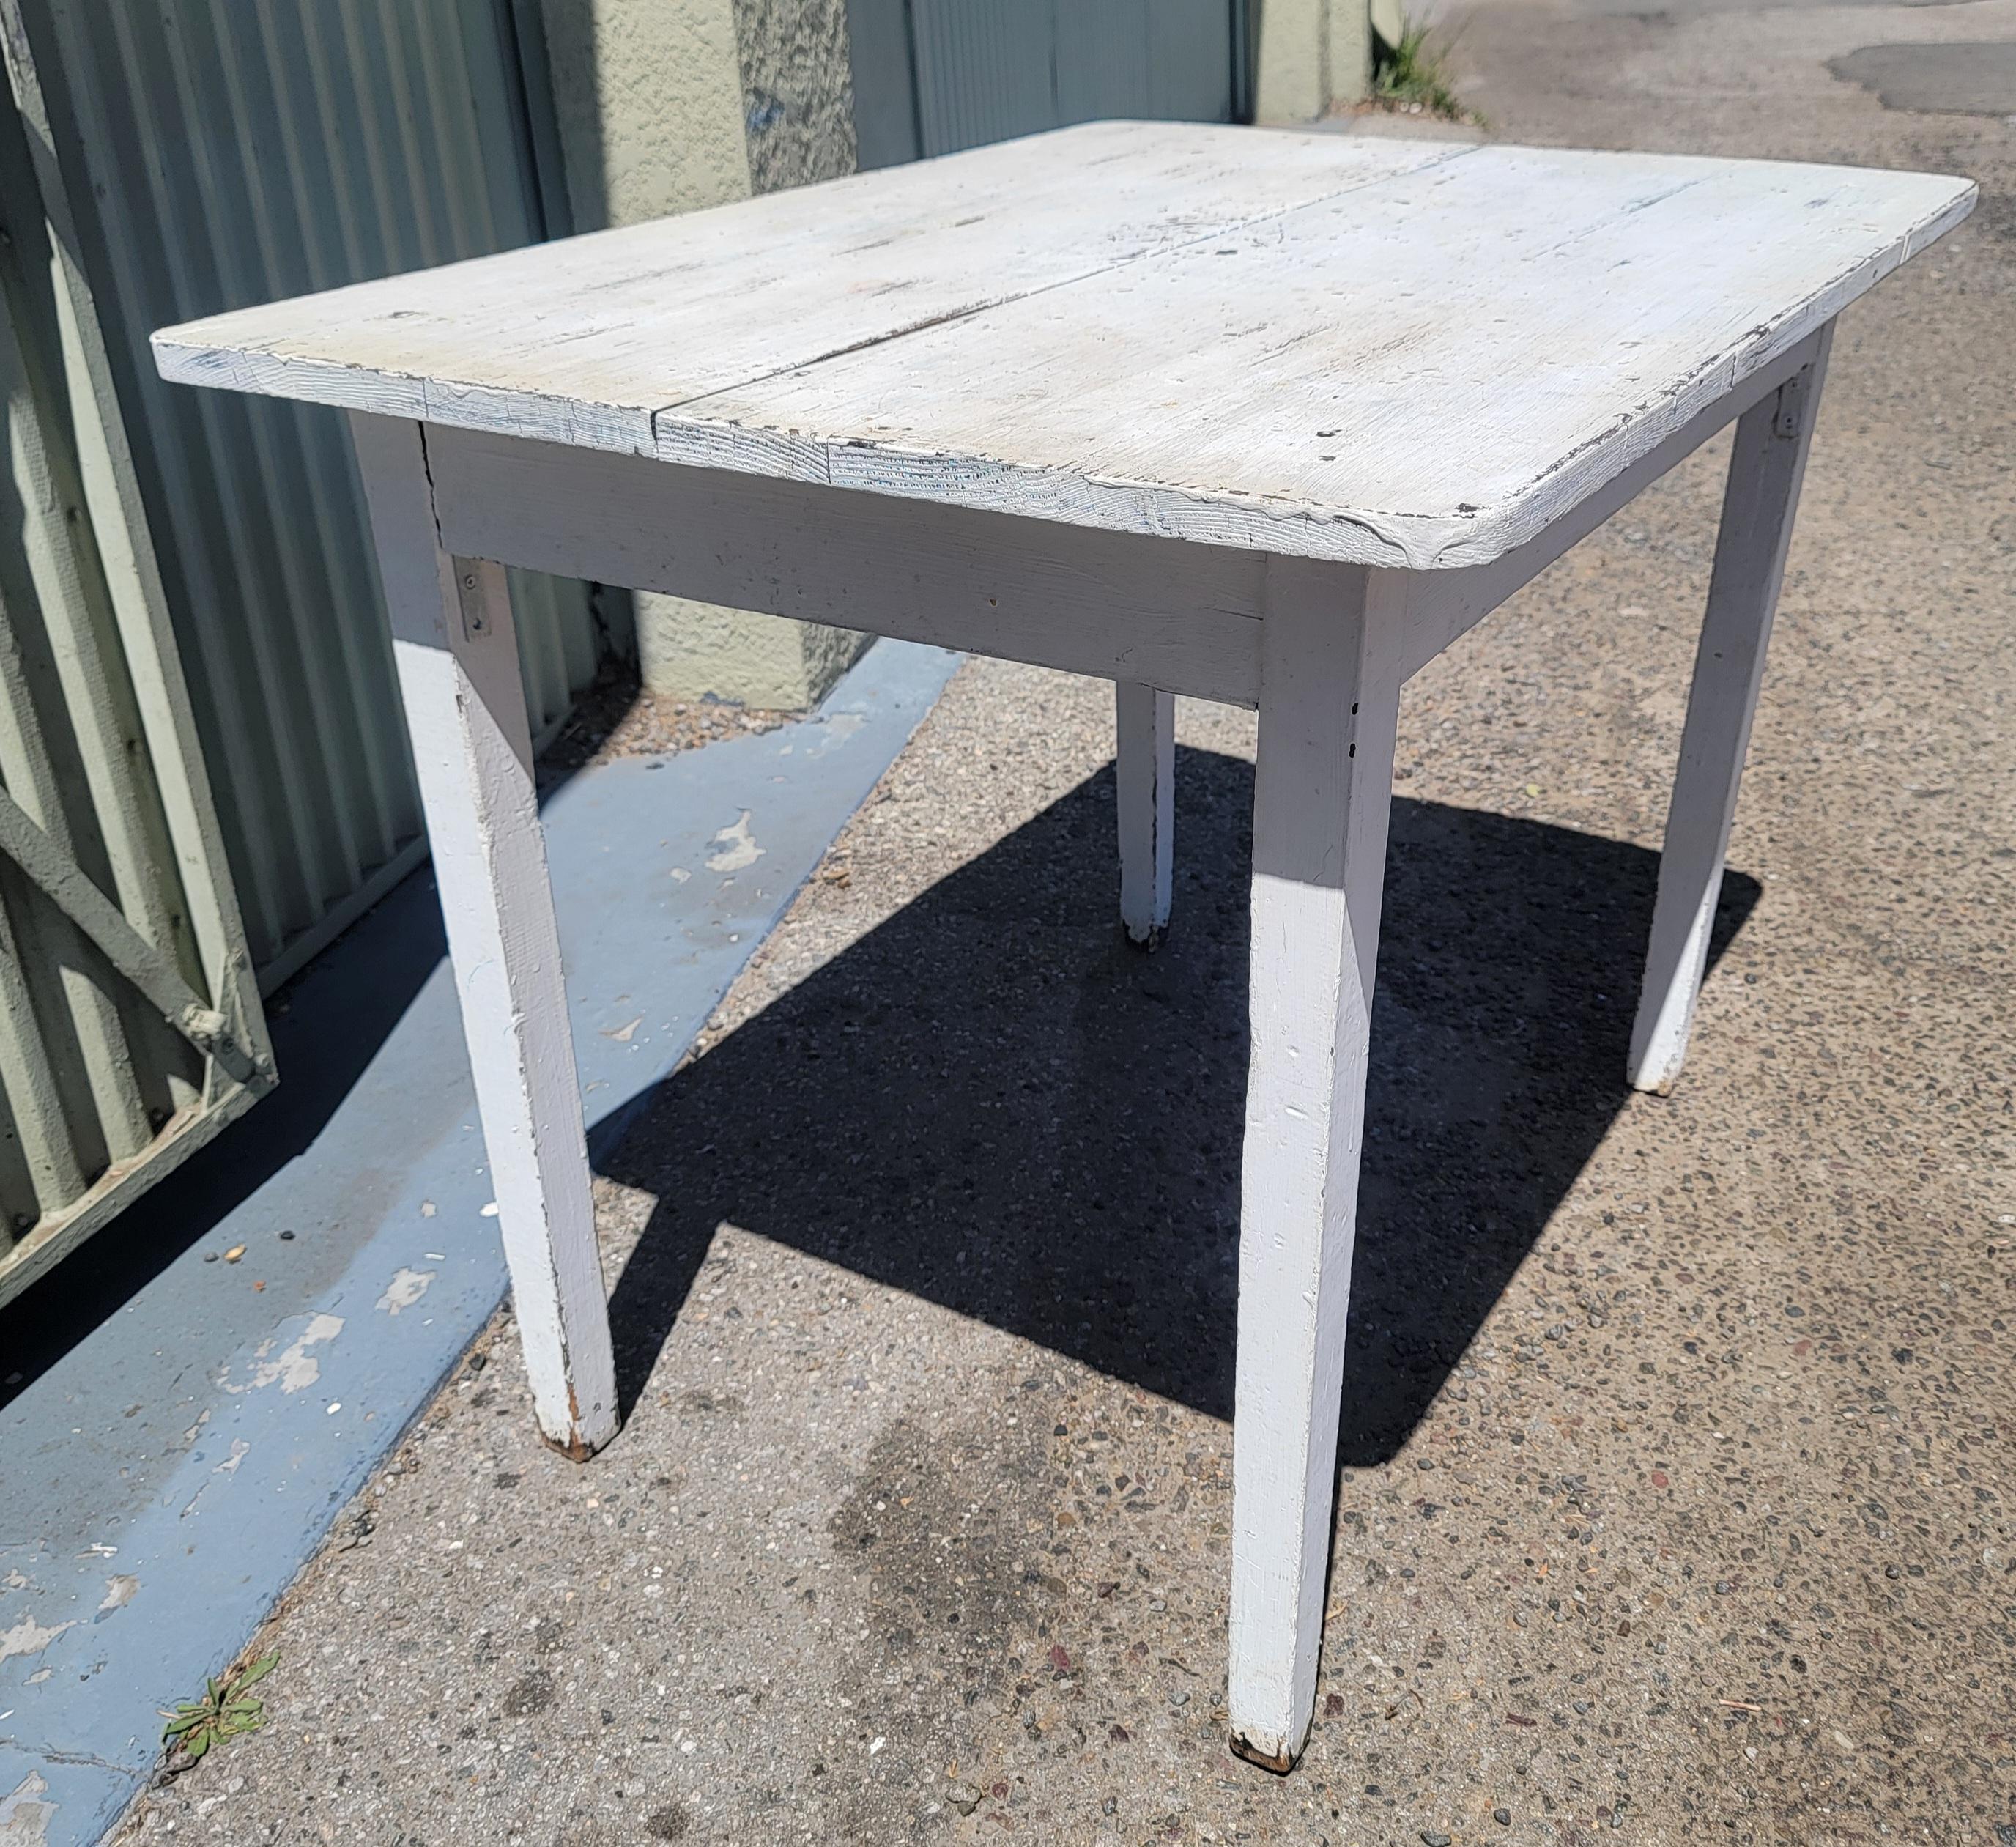 19Thc Original white painted two board top farm table from Pennsylvania in good sturdy condition.This farm table is square cut nail construction.